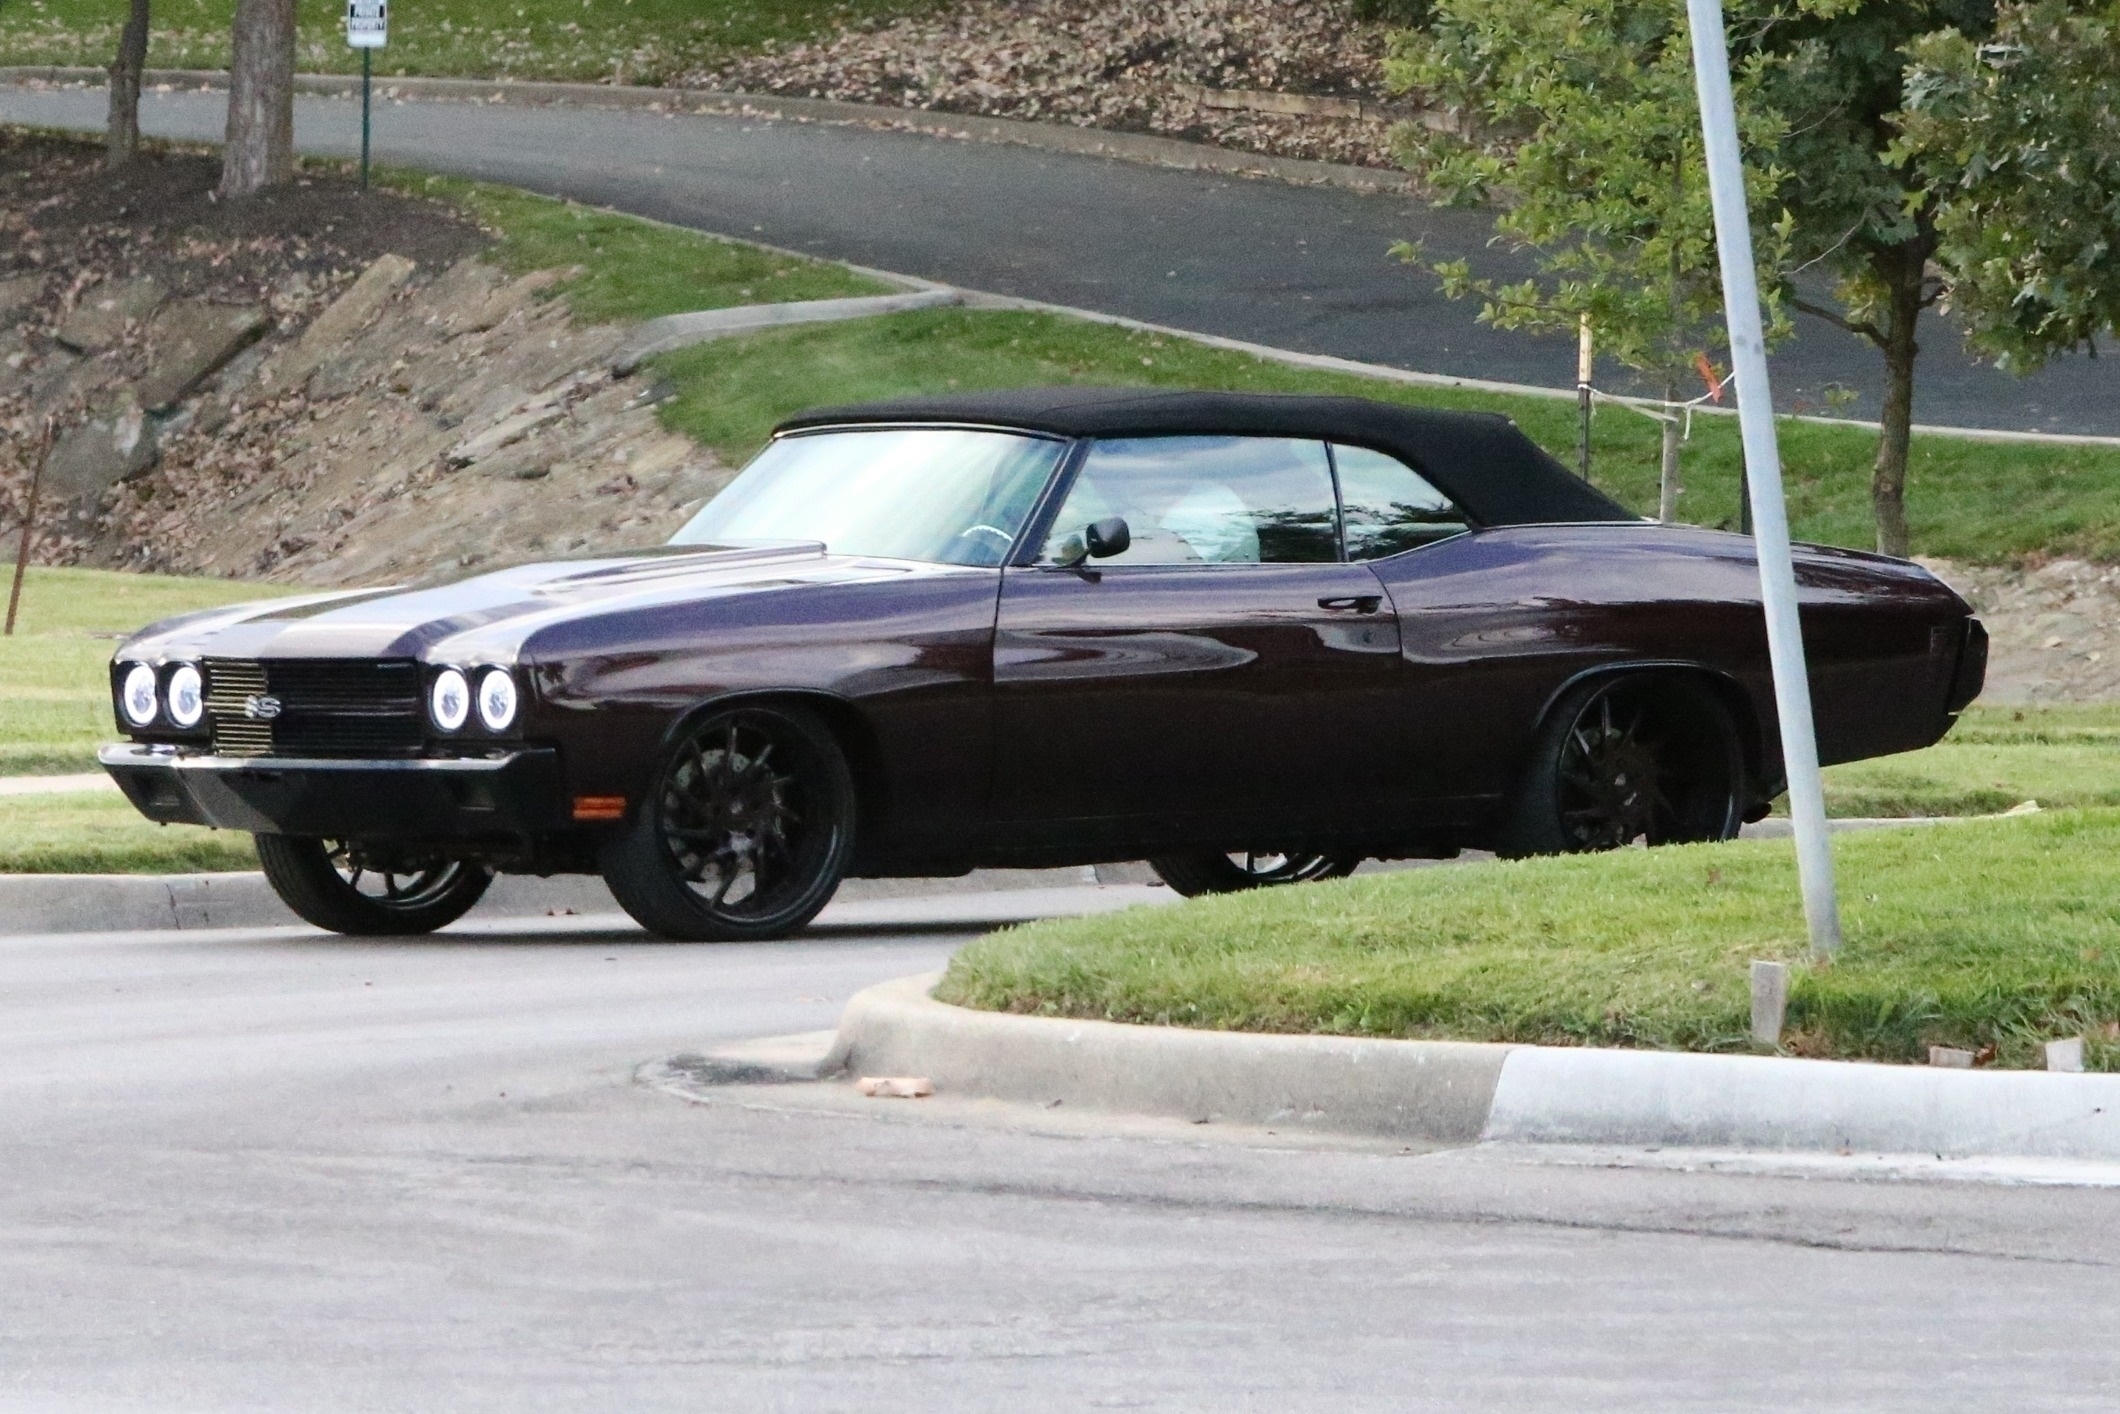 Each new car Travis (seen here in his 1970 Chevy) collects will provide him with another more lavish and exhilarating thrill, according to an expert